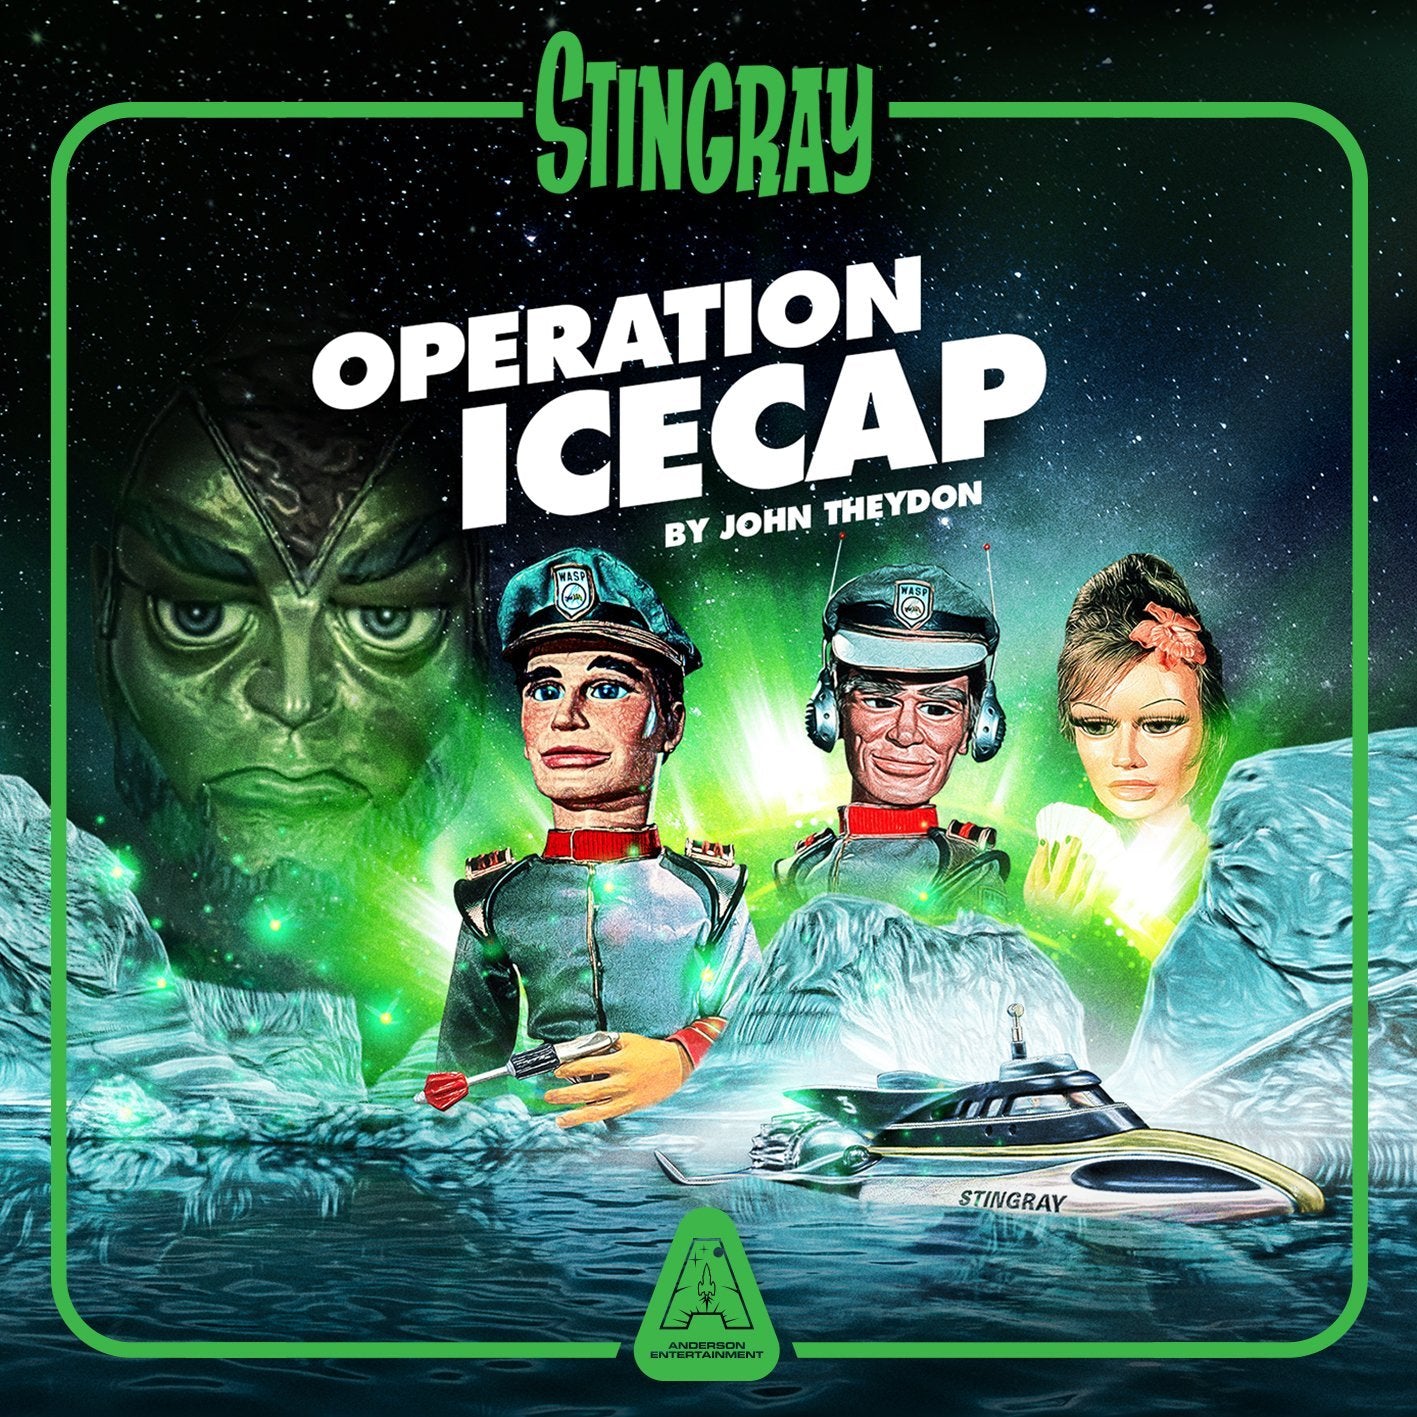 Stingray Operation Icecap Trailer - The Gerry Anderson Store